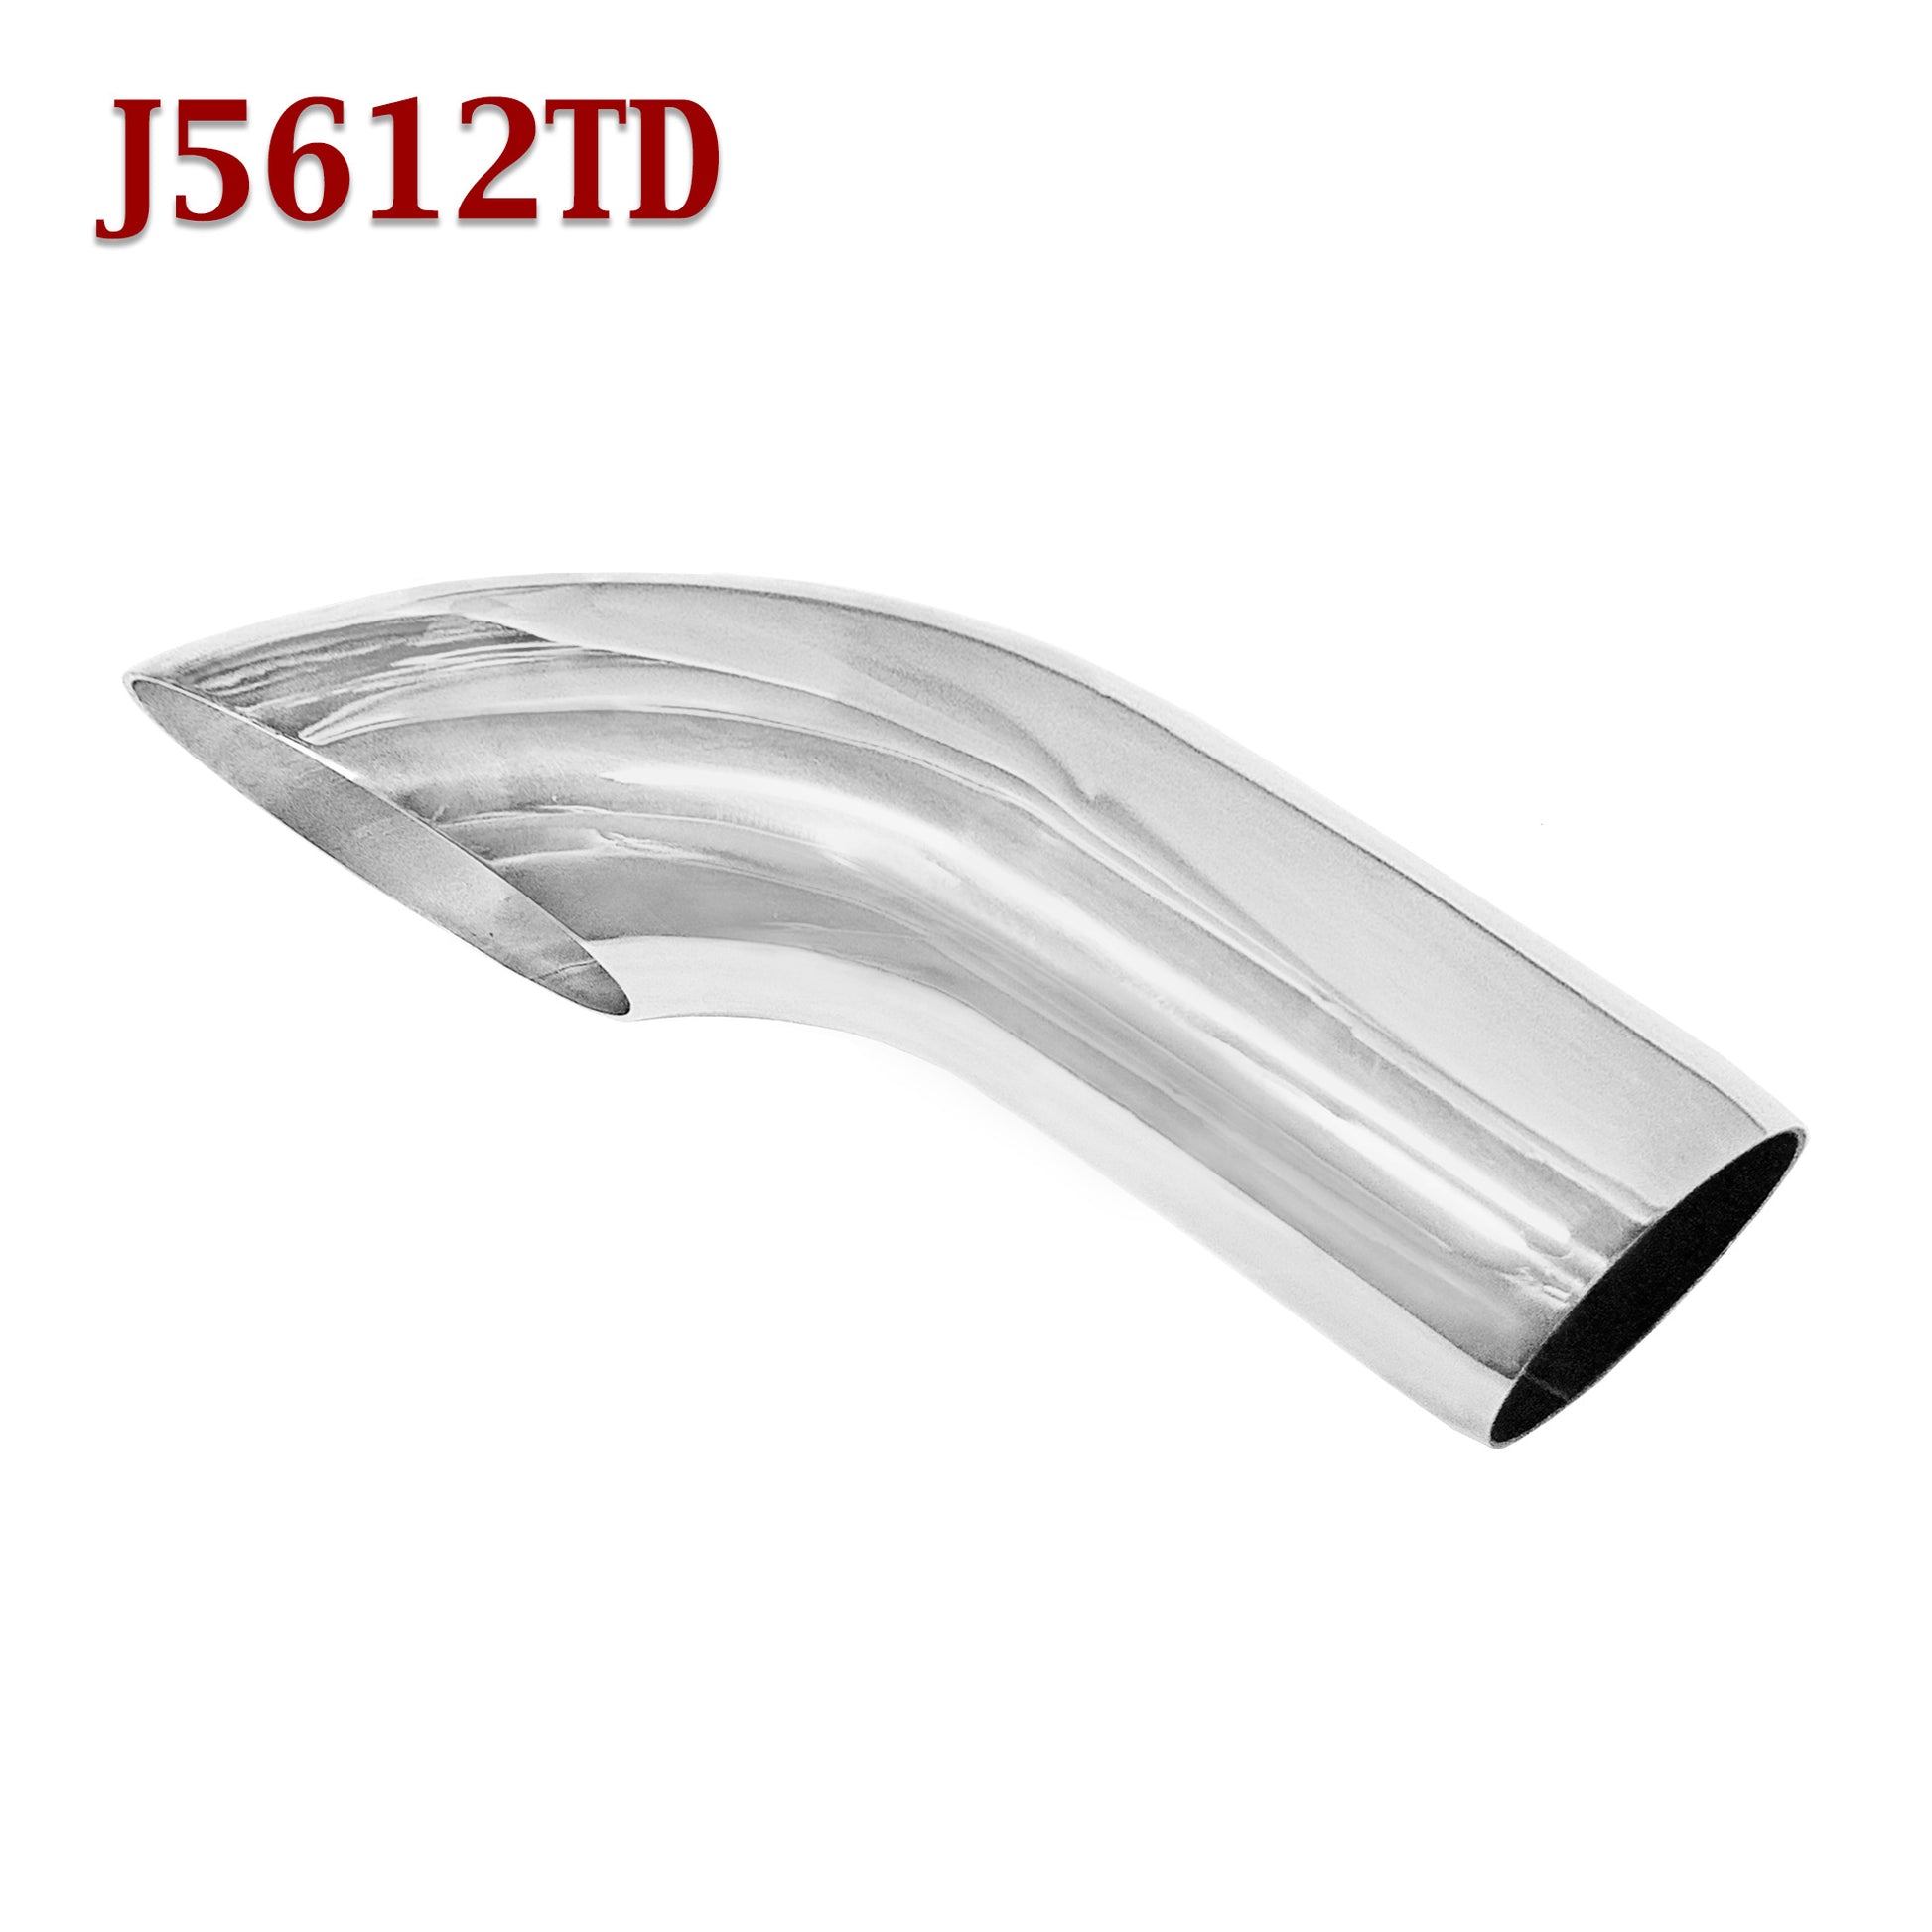 J5612TD 2.5 Stainless Turn Down Exhaust Tip 2 1/2 Inlet 2 3/4 Outle –  Bear River Converters